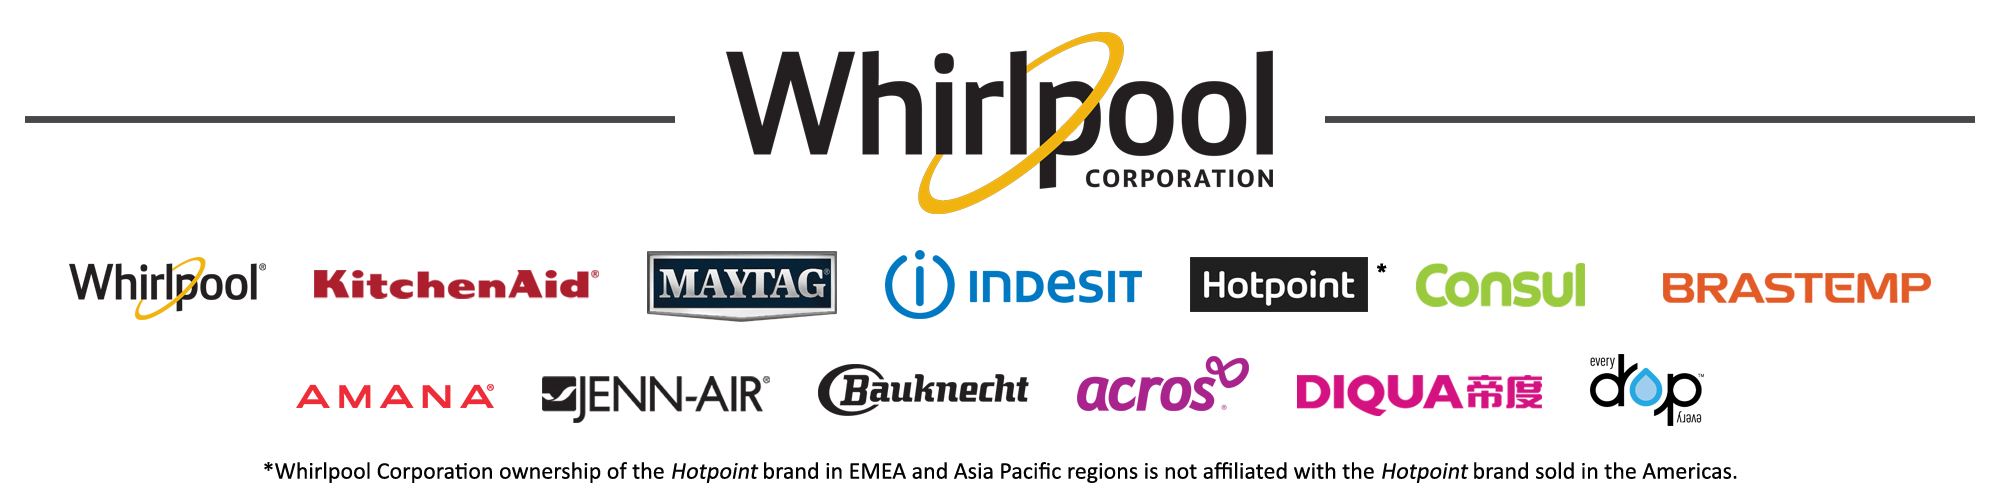 Whirlpool Corporation Brand Logos - Acros, Transparent background PNG HD thumbnail